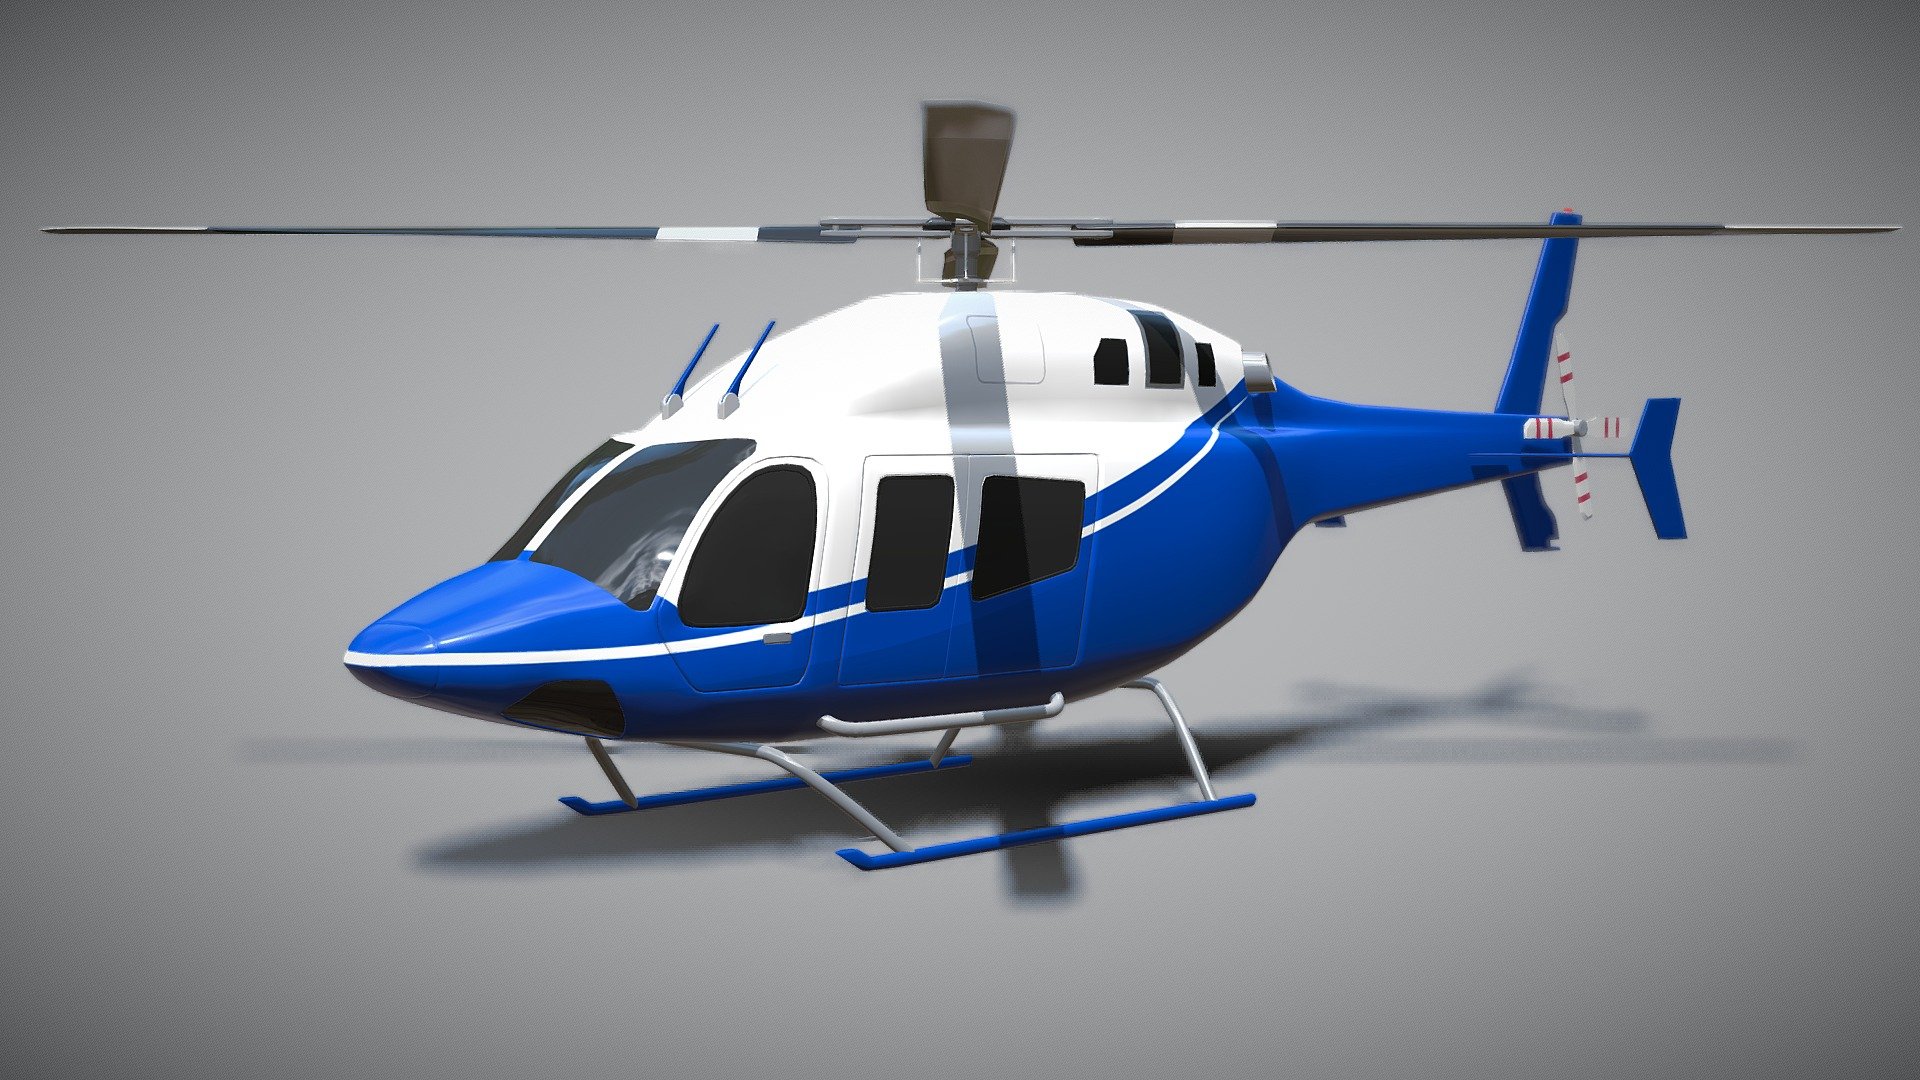 Bell 429 helicopter 3d model created with latest blender3d 2.79 version.Rendering previews created with blender internal render.Most of the objects detached named by object and by materials.There is one texture for main body,with stripes and with some panel details.If you need 3d model with less polygons use blender file to remove subsurface modifier.Enjoy my product.

3ds file 
verts: 278304 
polys: 92768

obj file 
verts: 50293 
polys: 92768 - Bell 429 helicopter - Buy Royalty Free 3D model by koleos3d 3d model